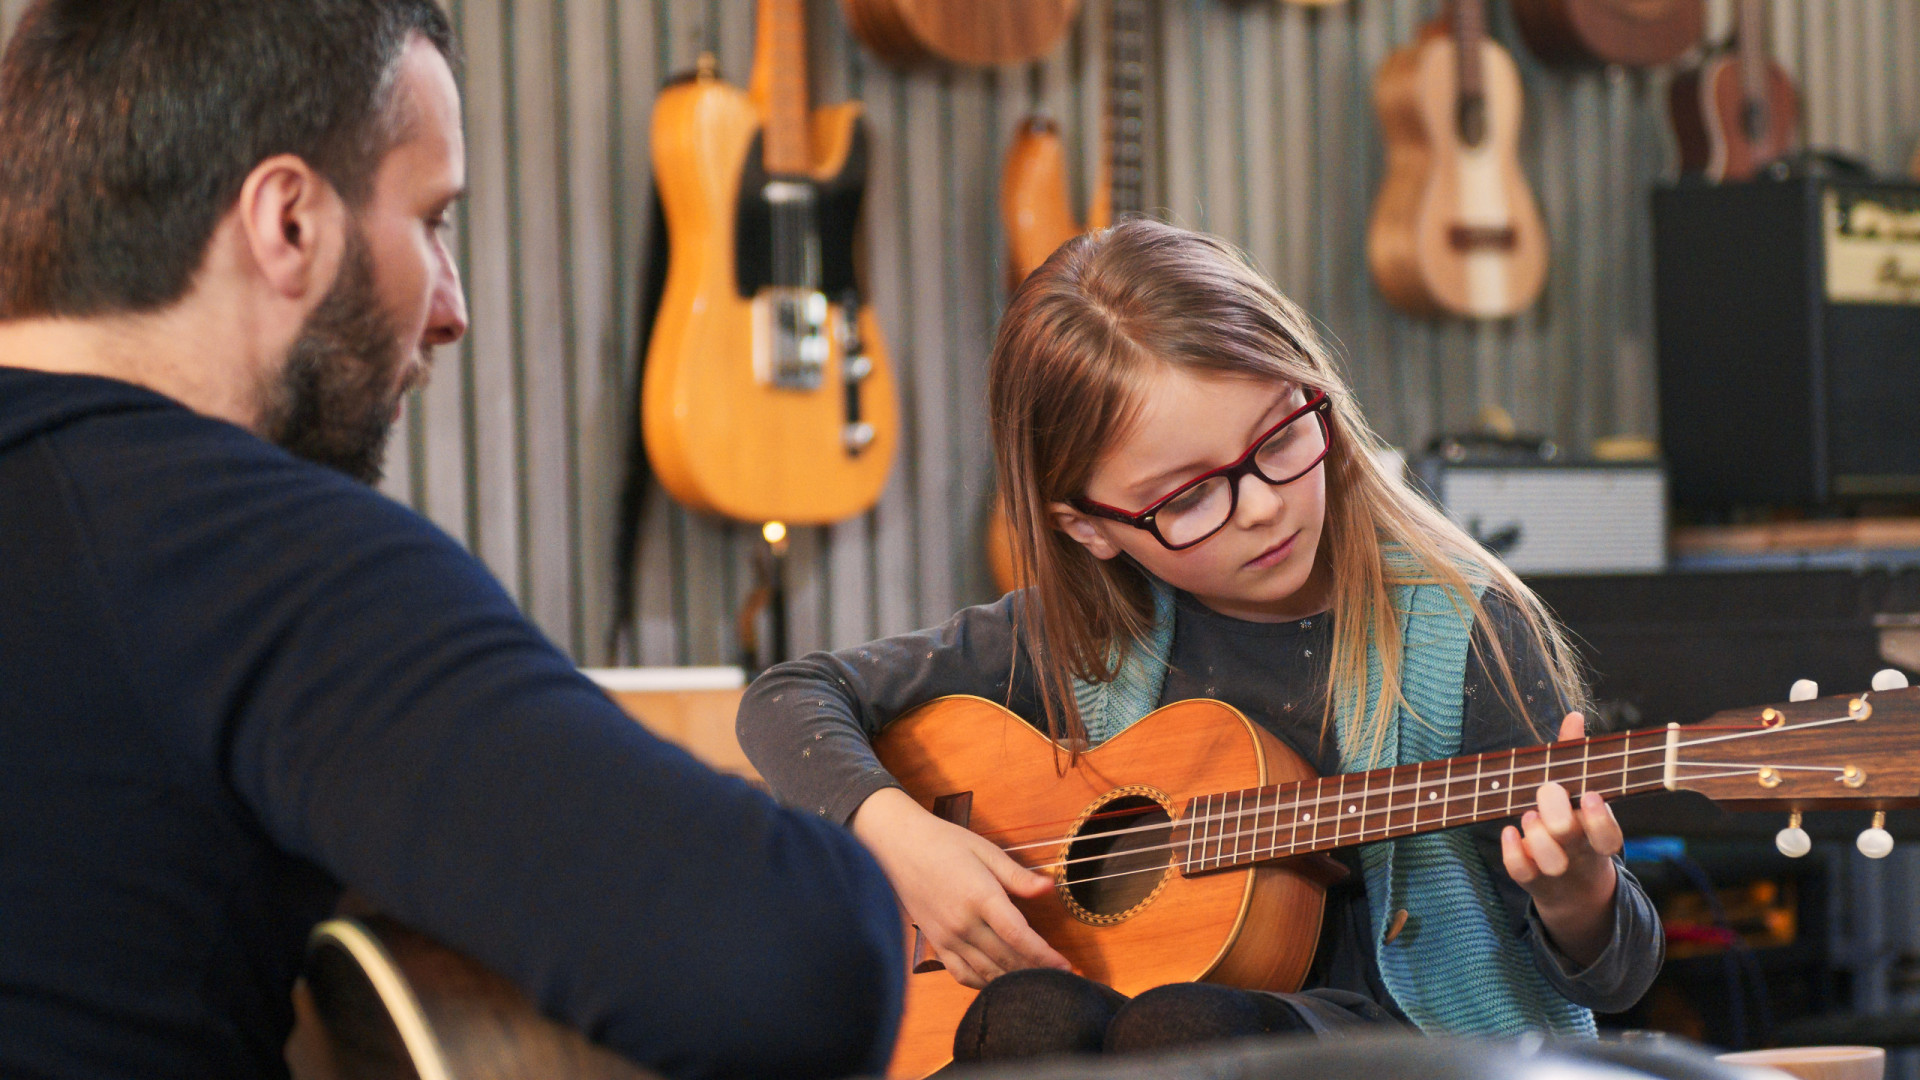 <p>If you're a talented musician, use those music skills to teach others. To get started, try to connect with local music schools for part-time gigs. This can also help you build a reputation with potential clients.</p><p>You may also like:<a href="https://www.starsinsider.com/n/489501?utm_source=msn.com&utm_medium=display&utm_campaign=referral_description&utm_content=670061en-en"> Scandals that the Catholic Church doesn't want you to know about</a></p>